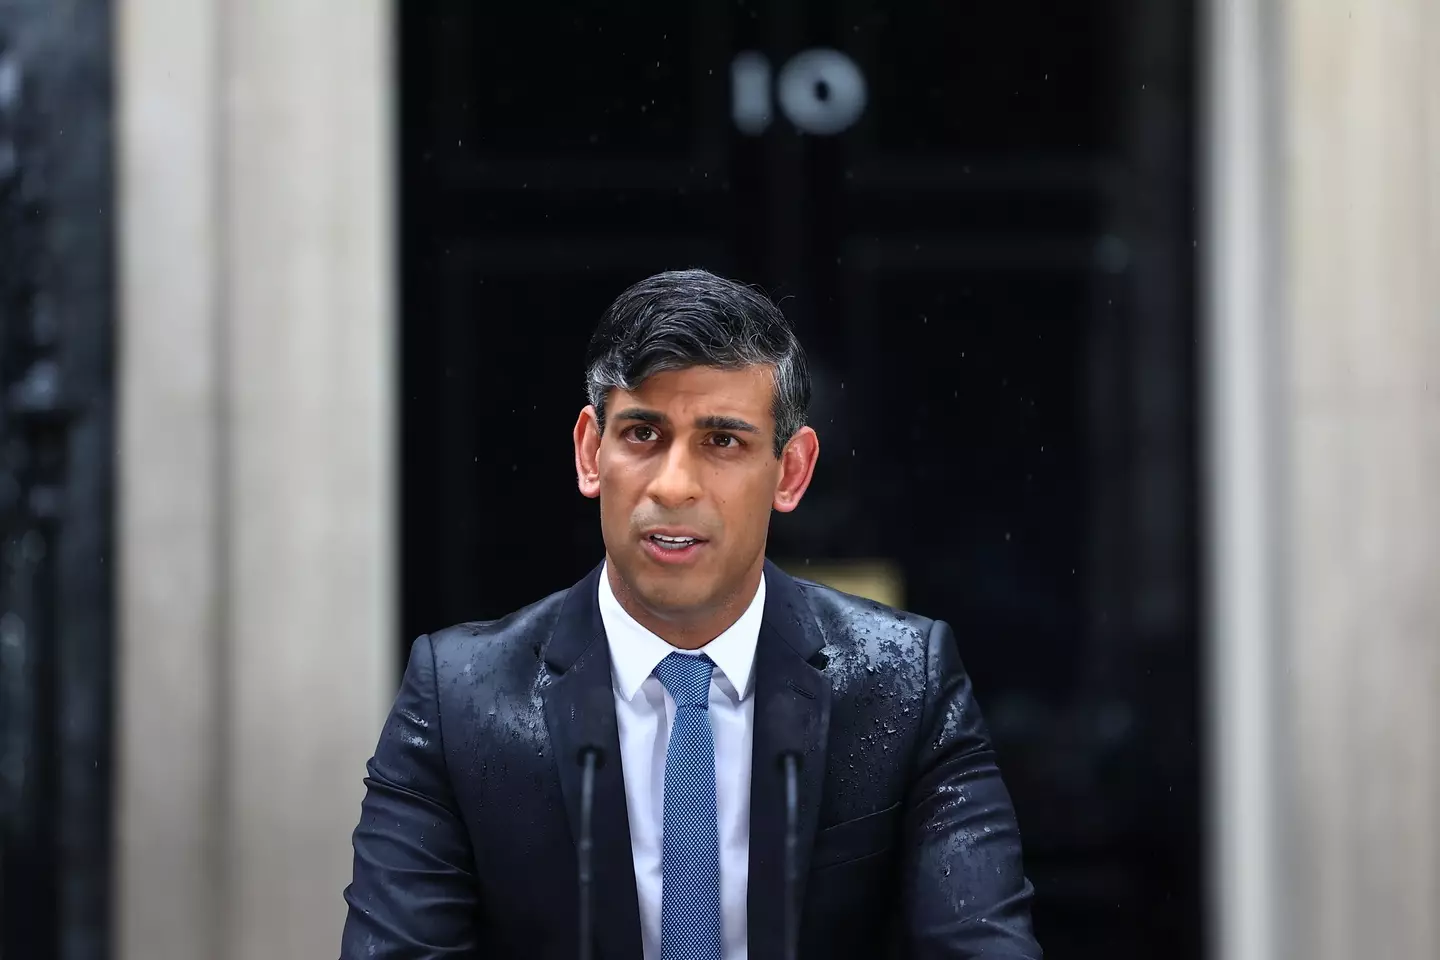 Rishi Sunak plans to introduce National Service - if the Conservatives win the general election (Peter Nicholls/Getty Images)